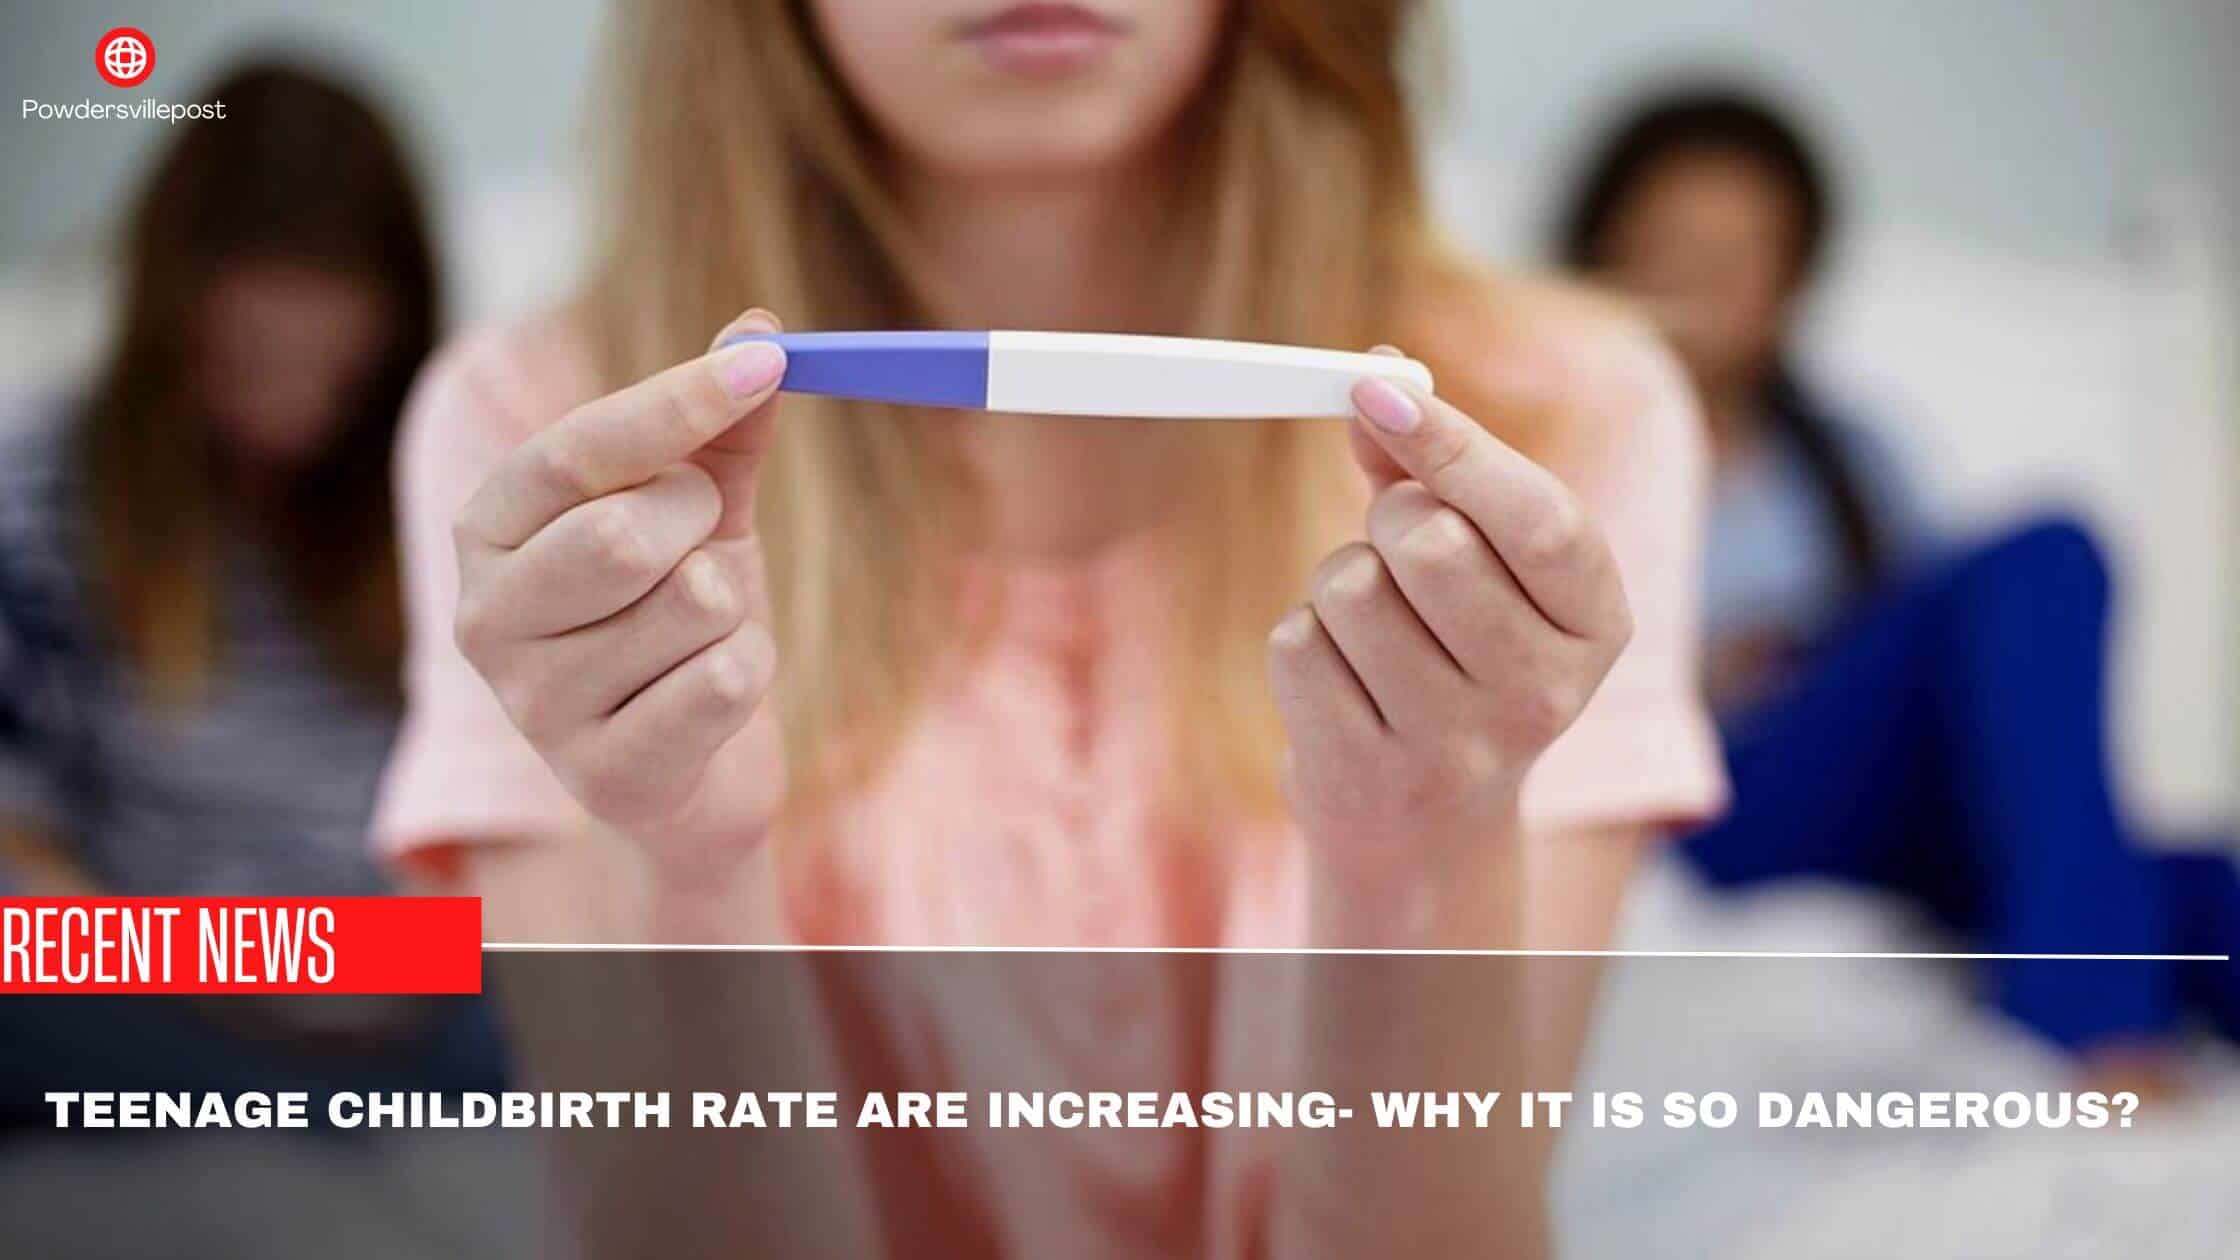 Teenage Childbirth Rate Are Increasing- Why It Is So Dangerous